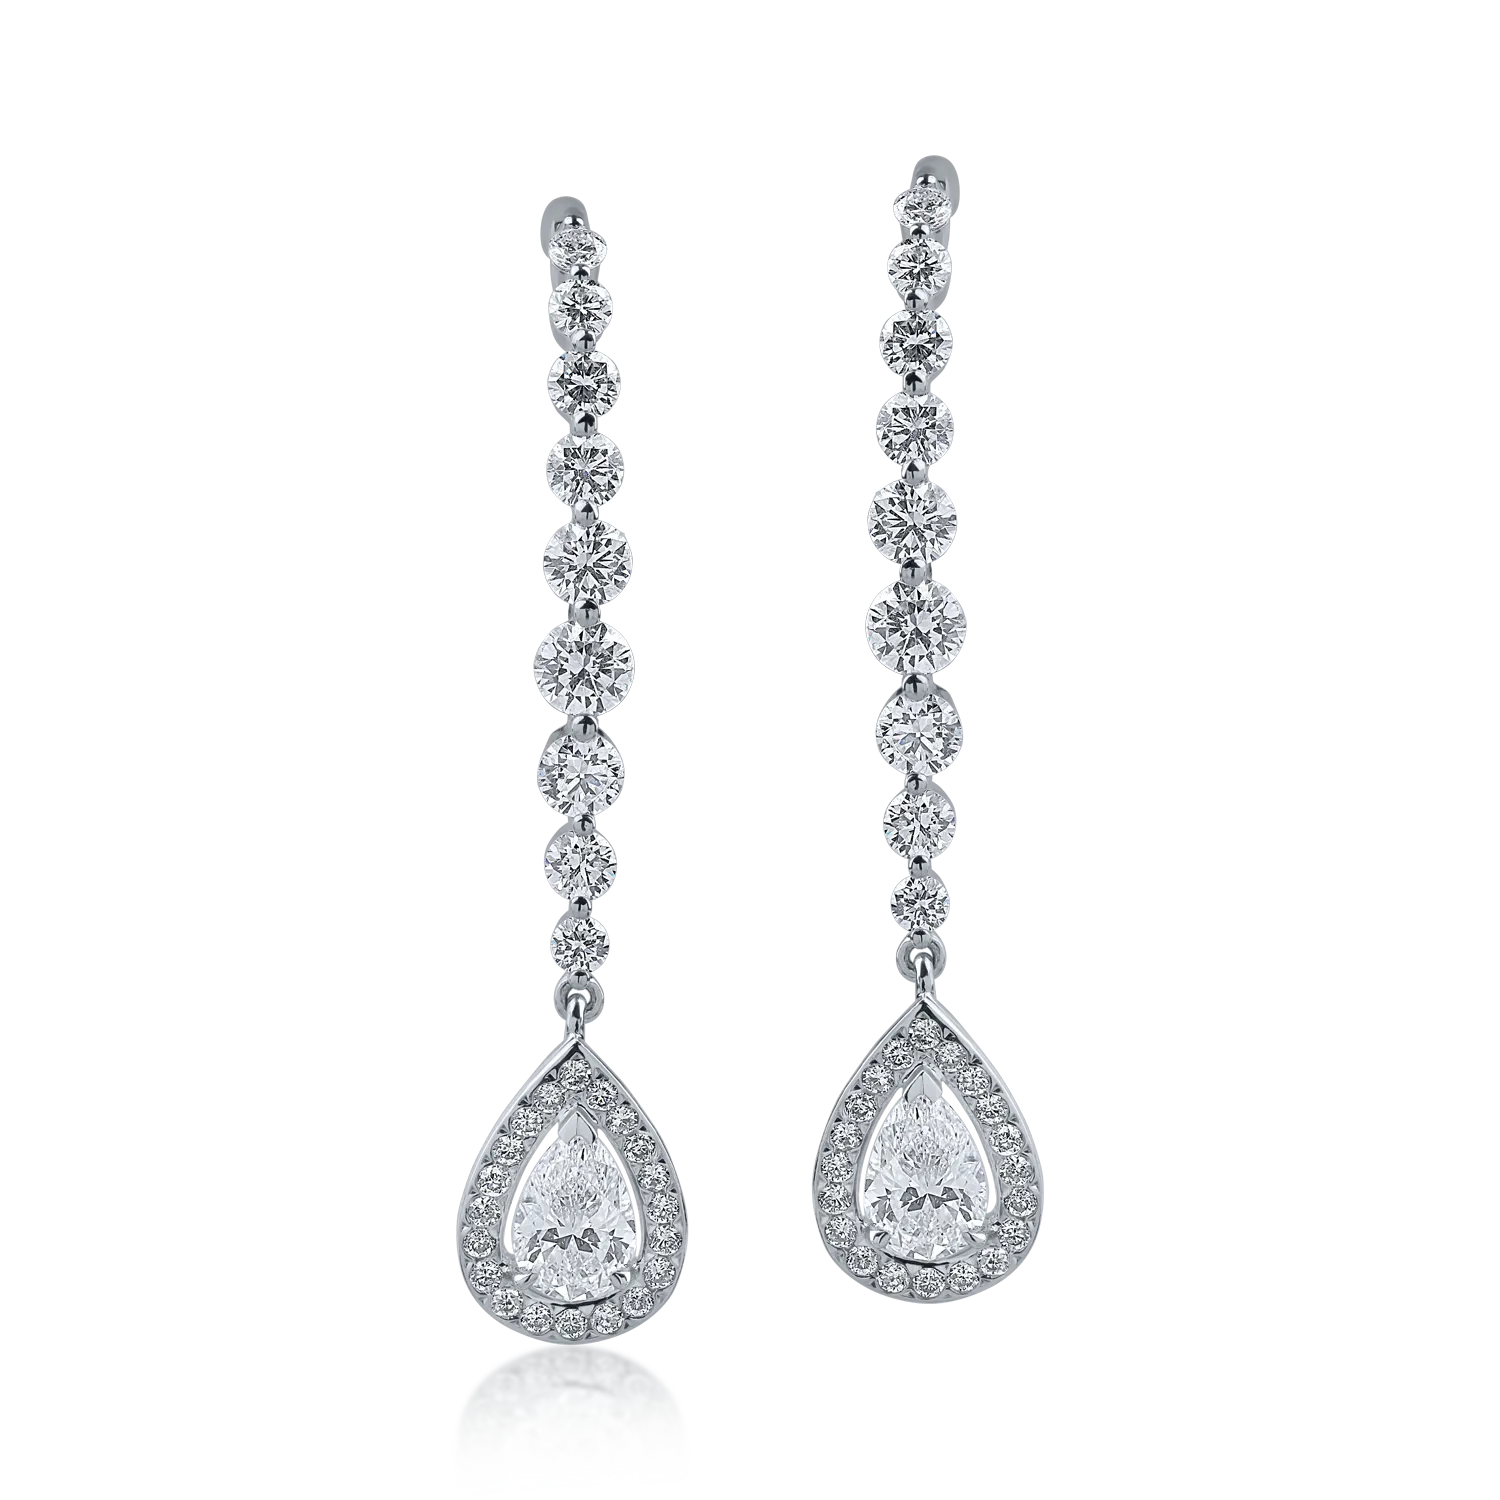 White gold earrings with 1.82ct diamonds